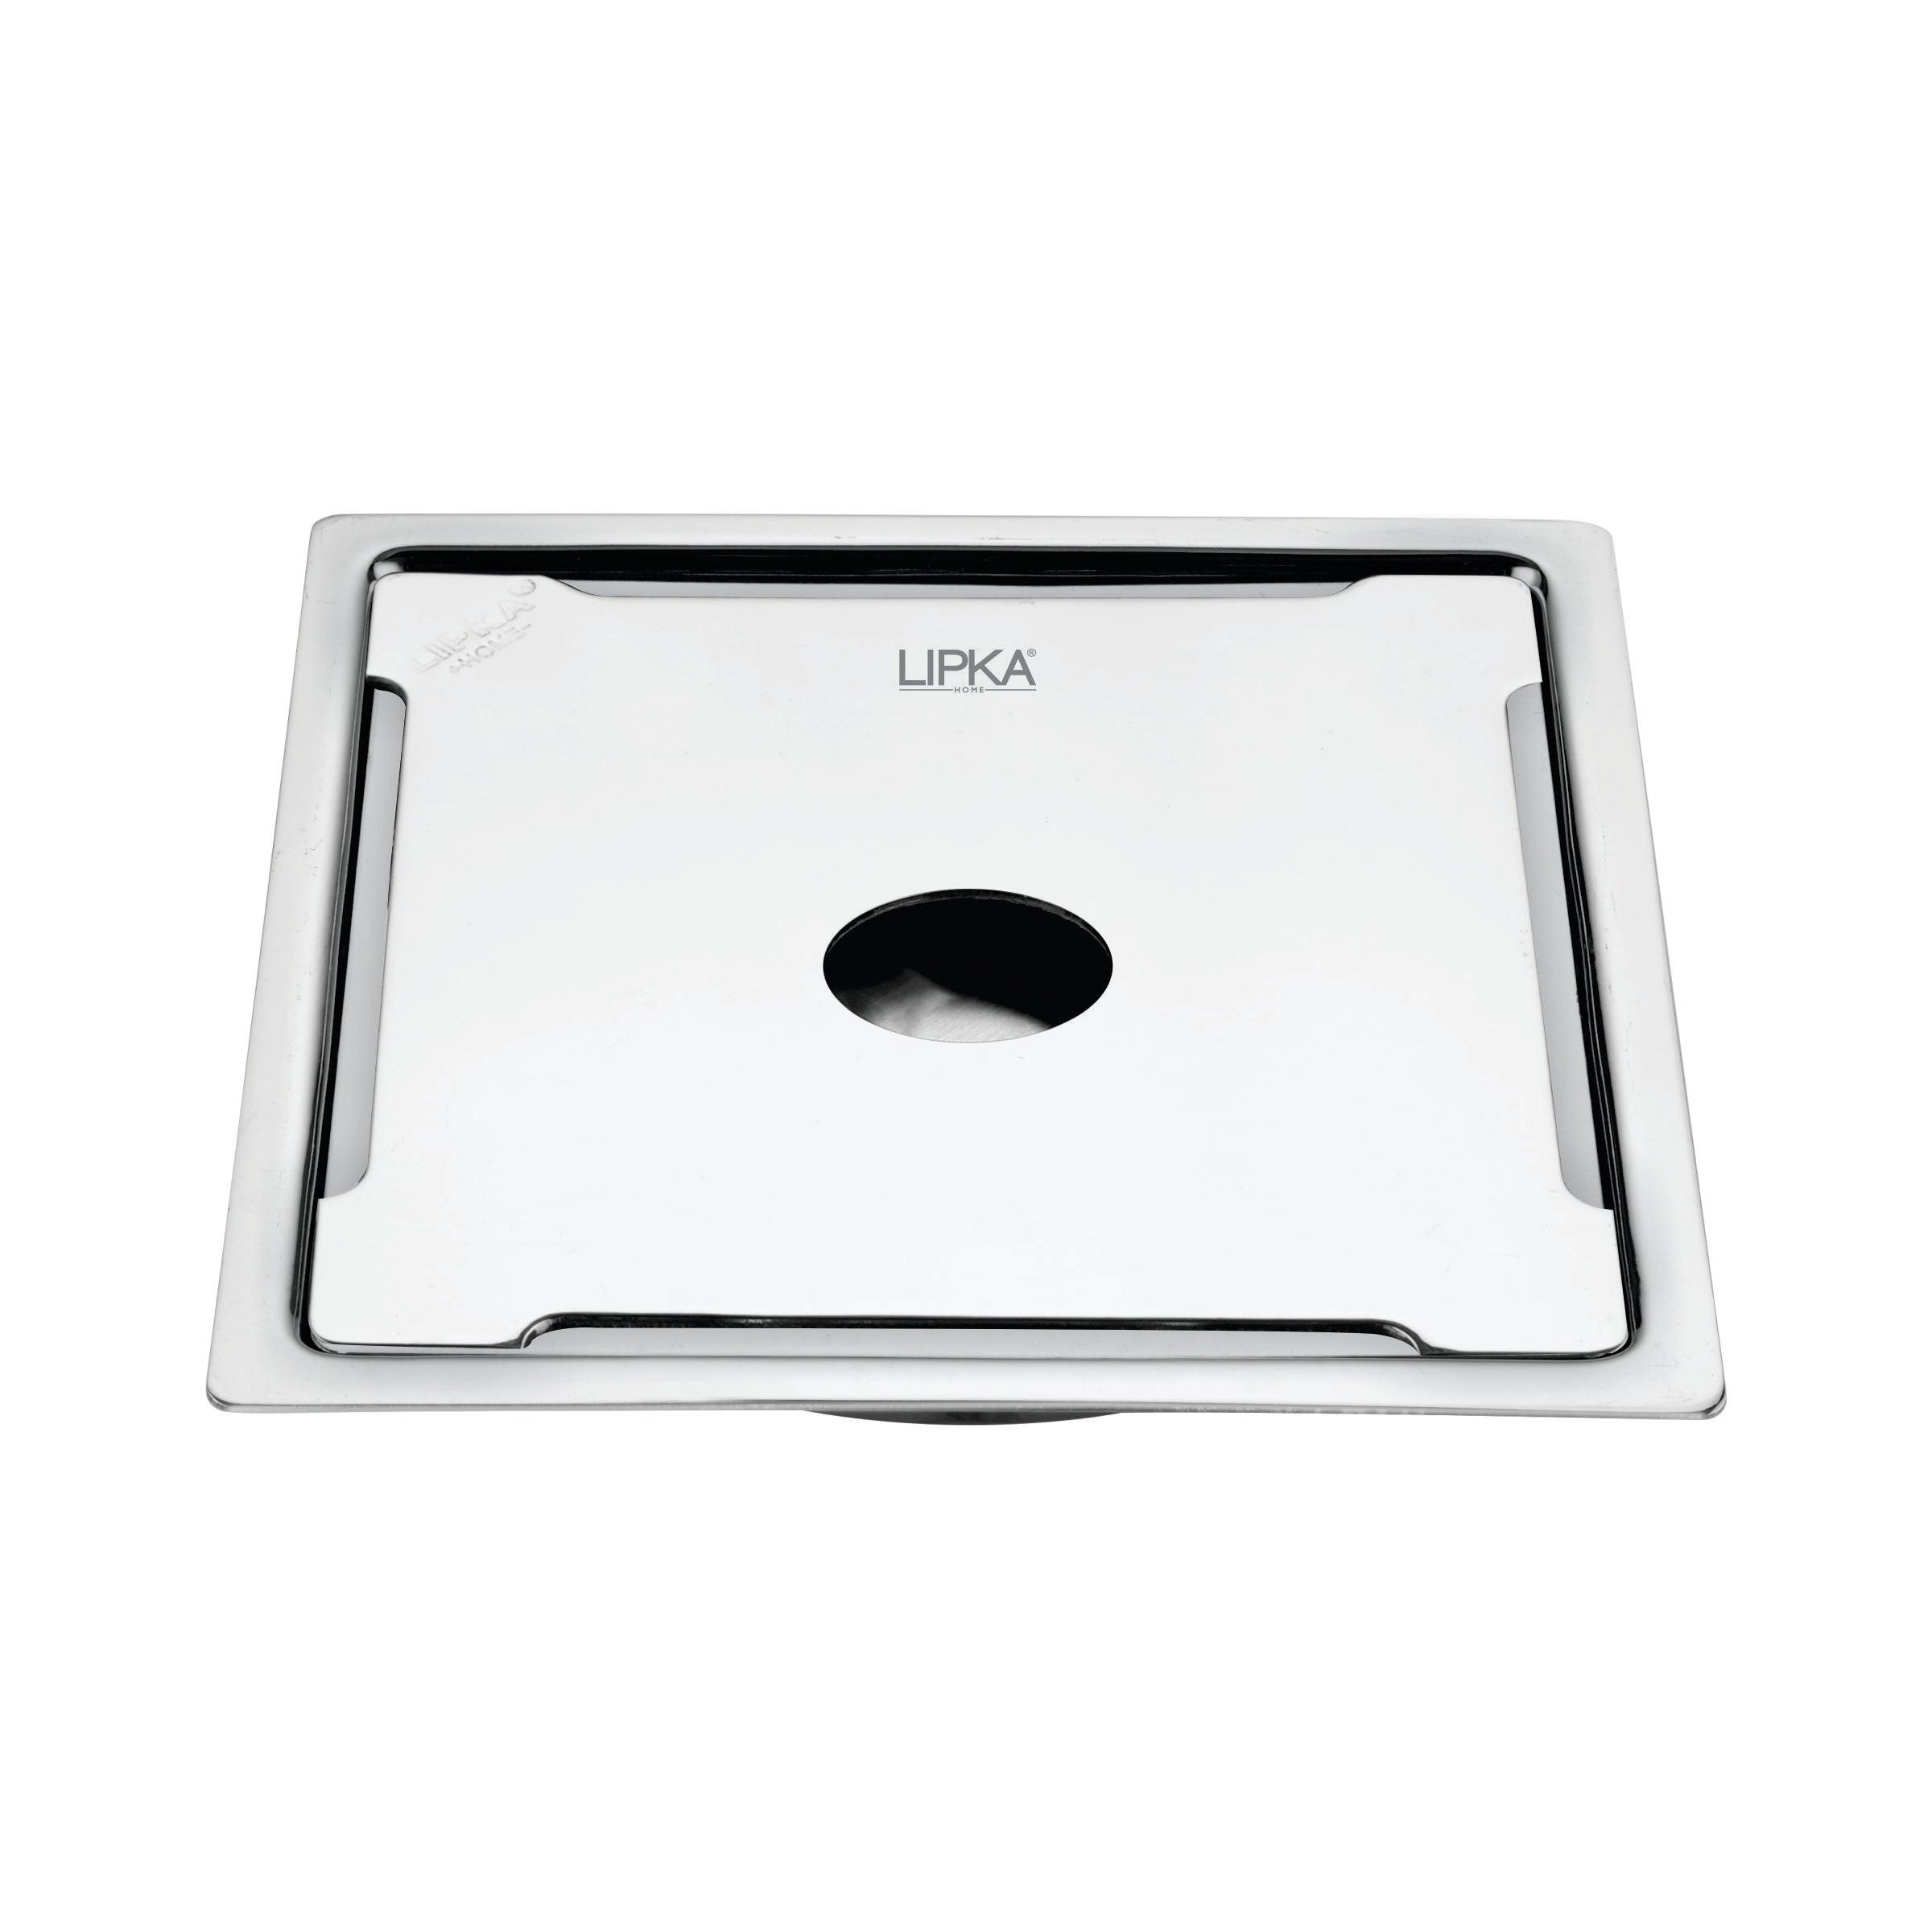 Beta Deluxe Square Flat Cut Floor Drain (6 x 6 Inches) with Hole